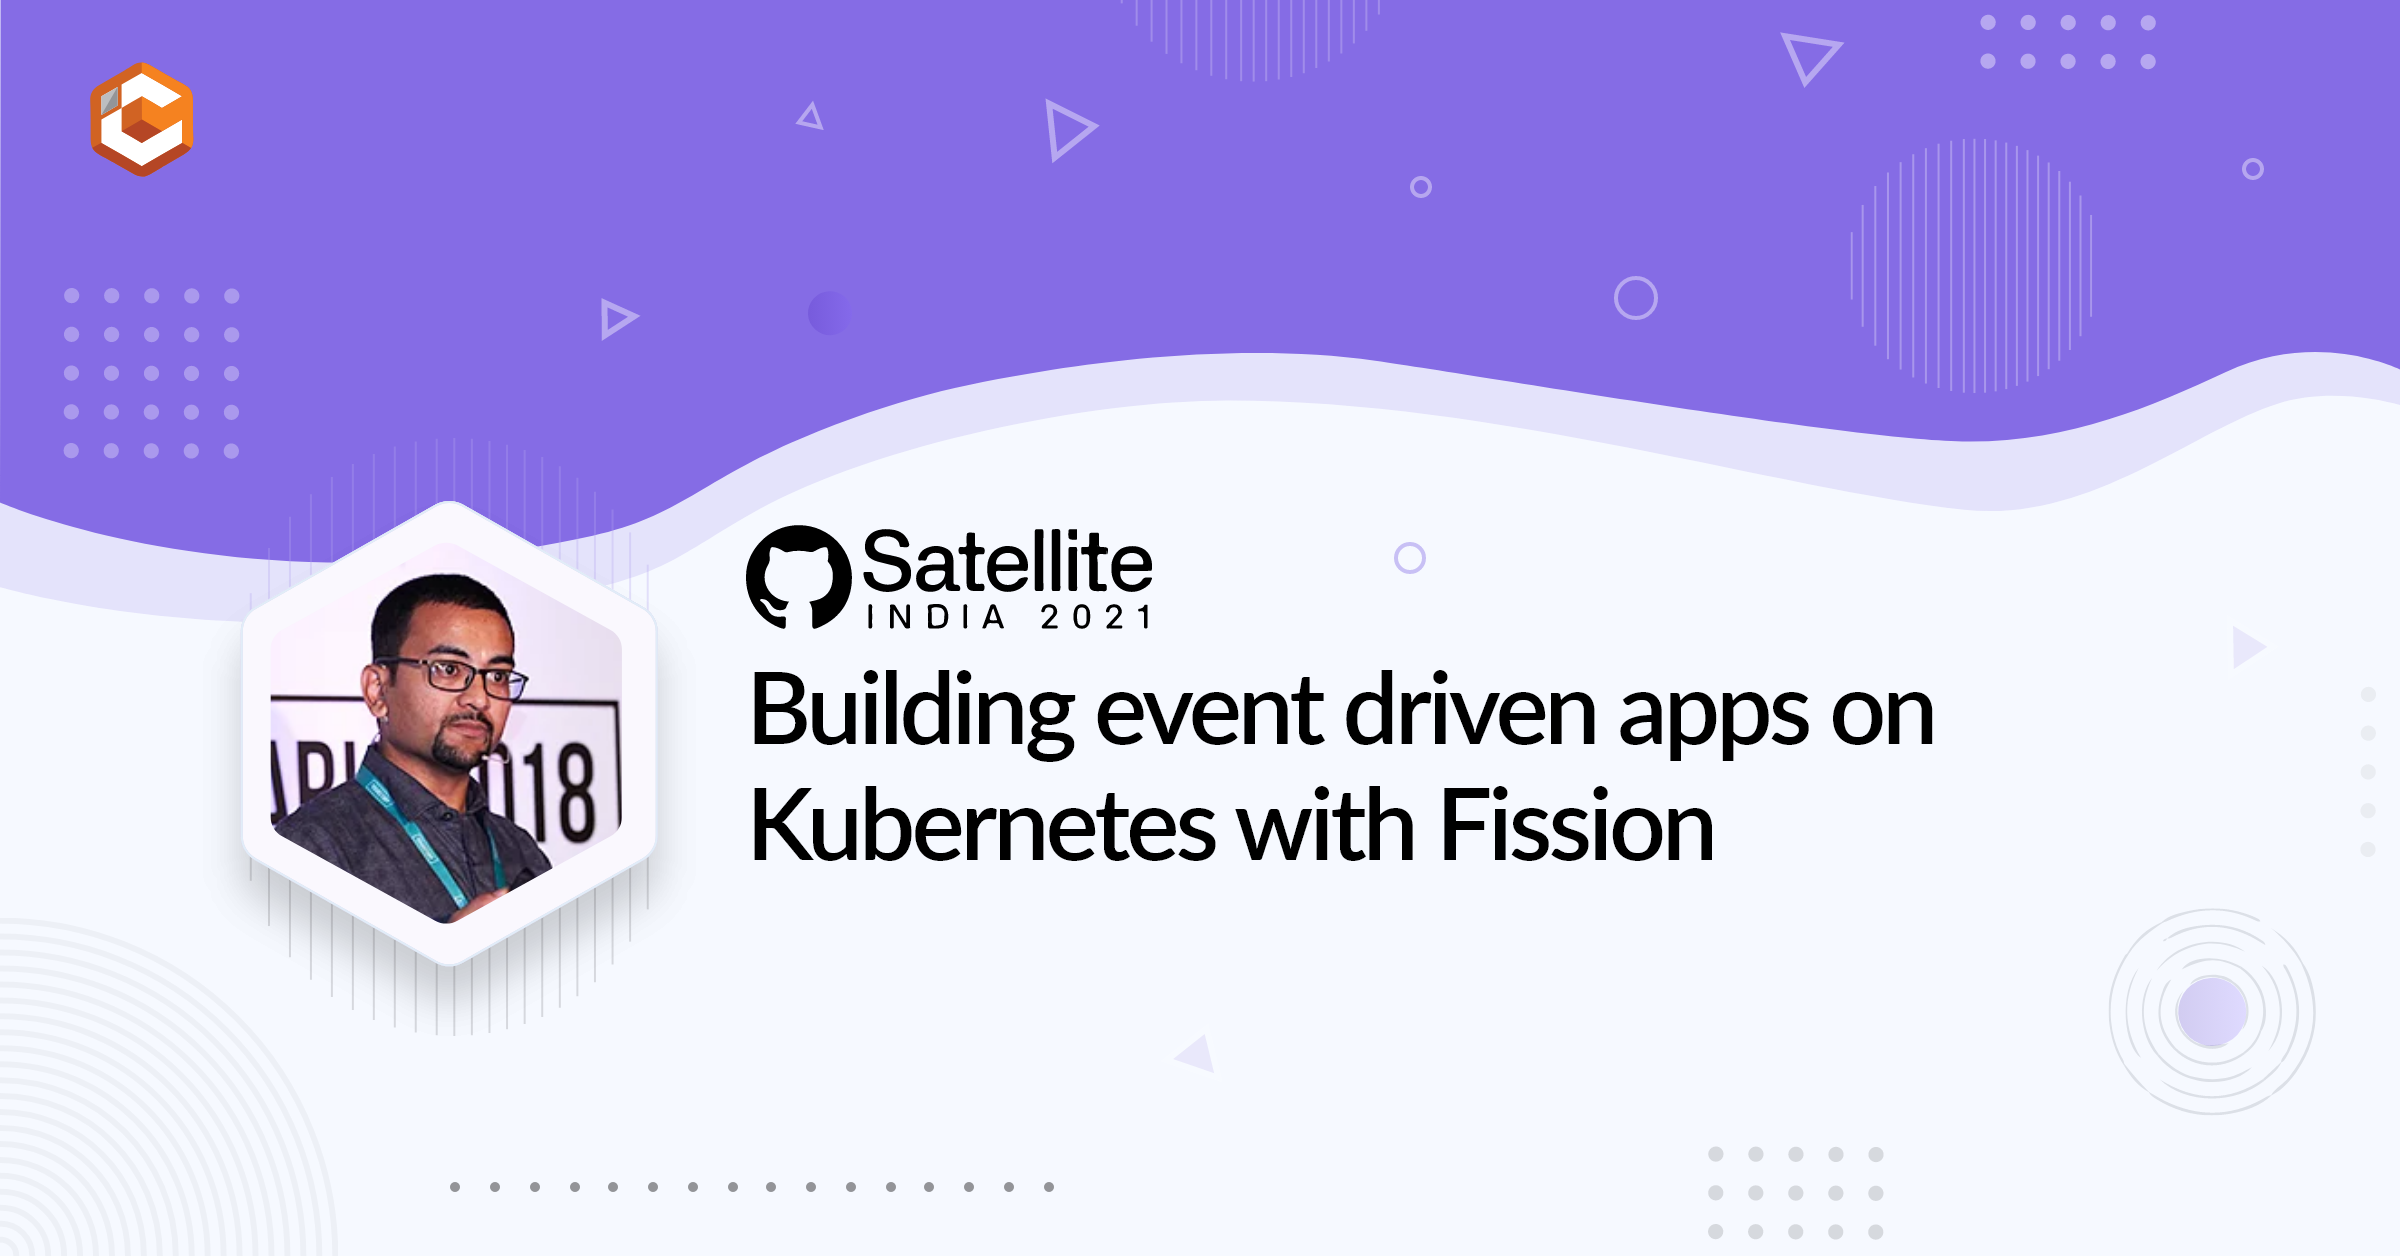 Building event driven apps on Kubernetes with Fission